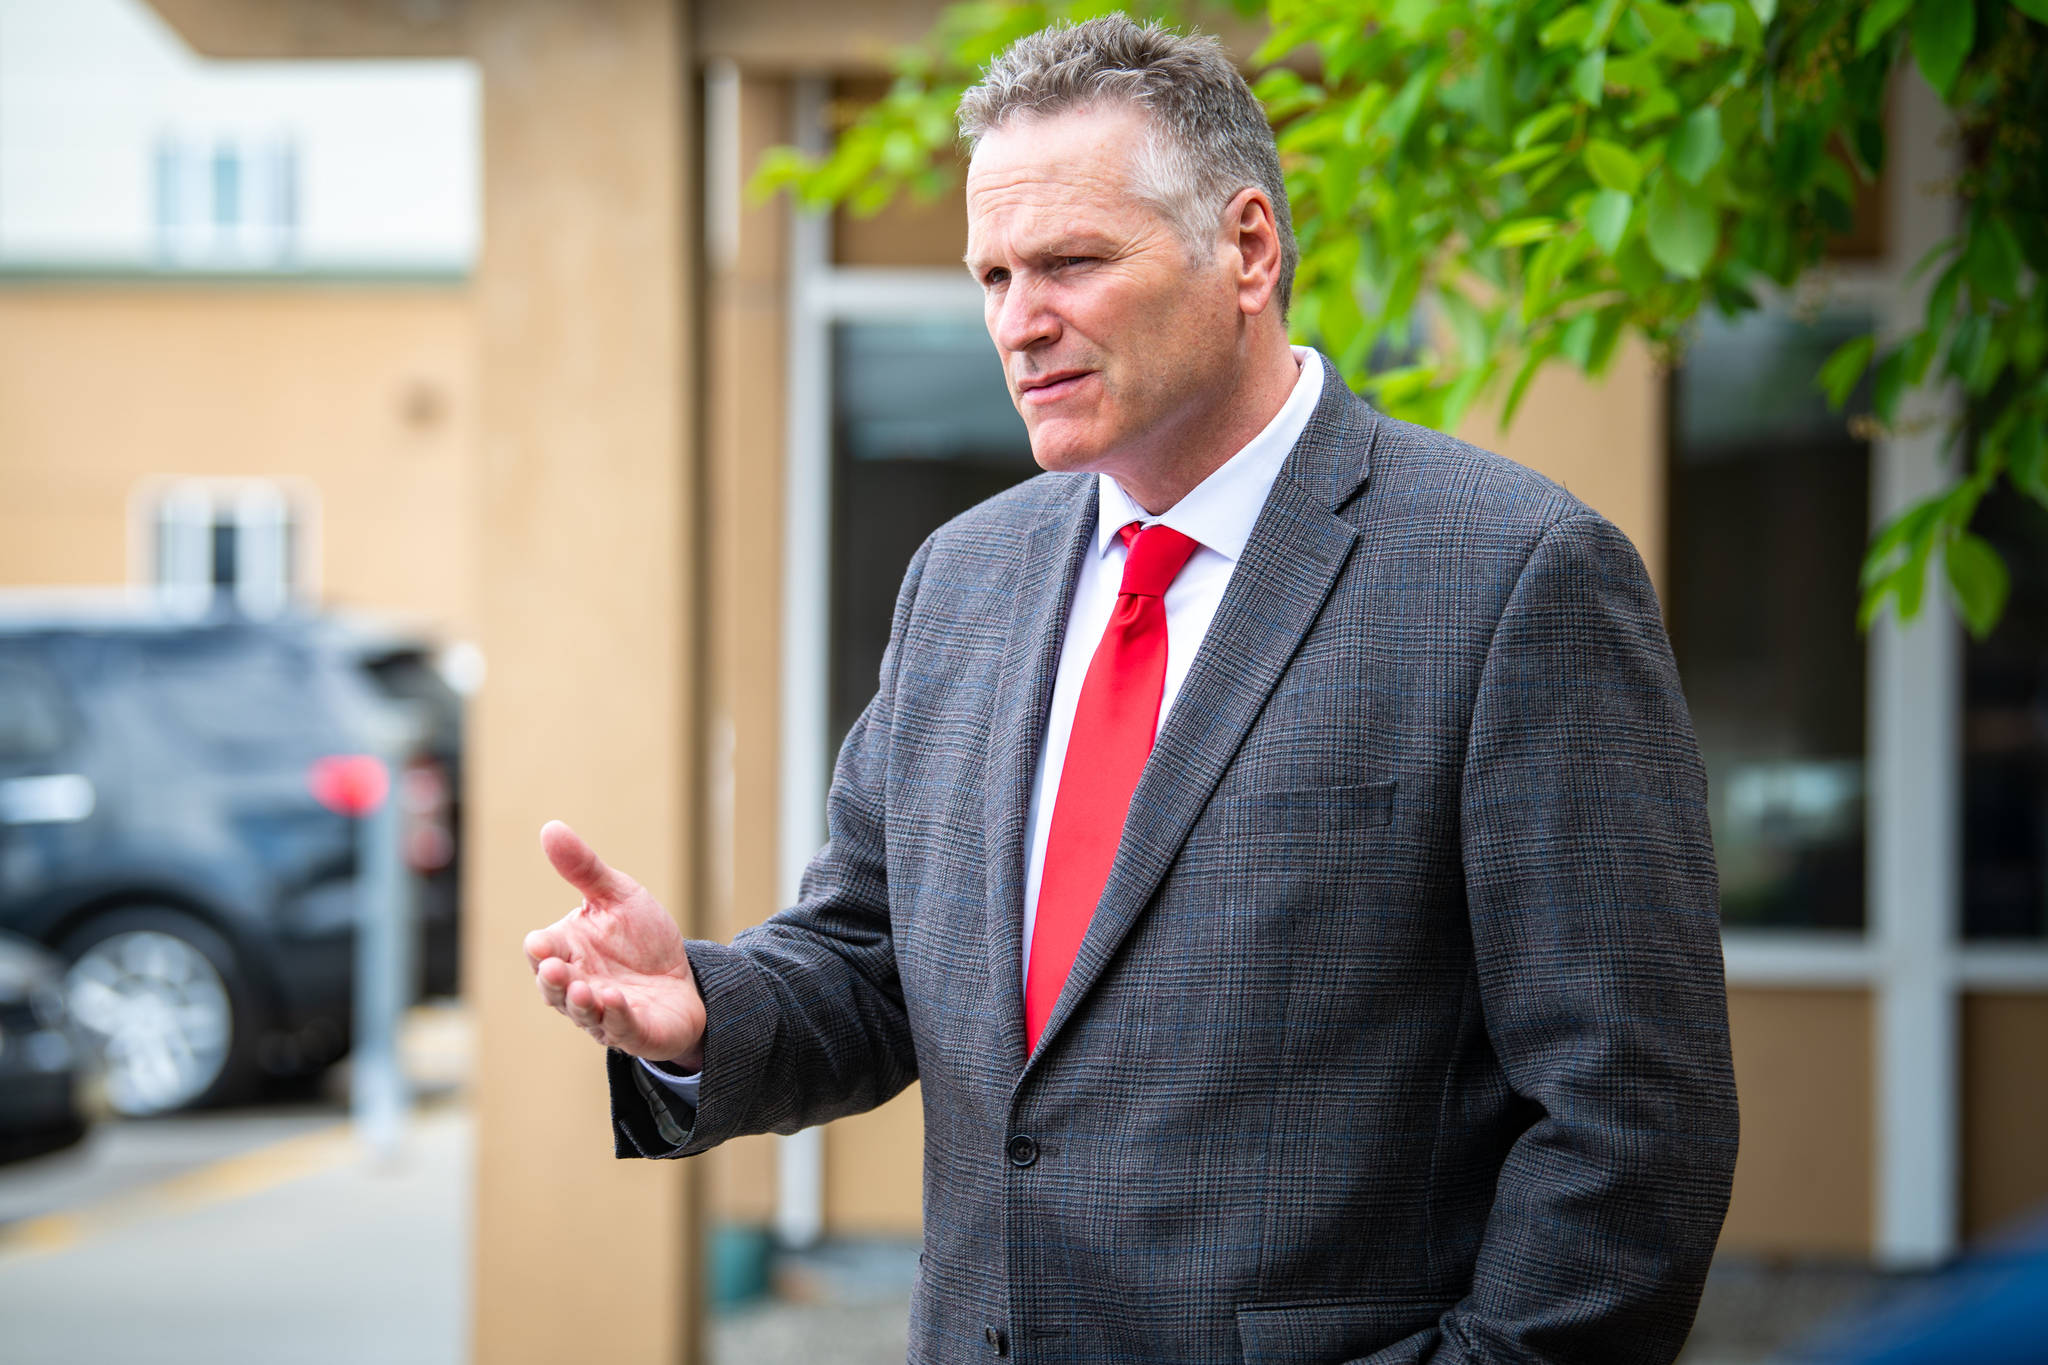 This June 10 photo shows Gov. Mike Dunleavy. The governor is holding a news conference on Thursday to address the spending plan recently passed by the Legislature. (Courtesy Photo / Office of Gov. Mike Dunleavy)